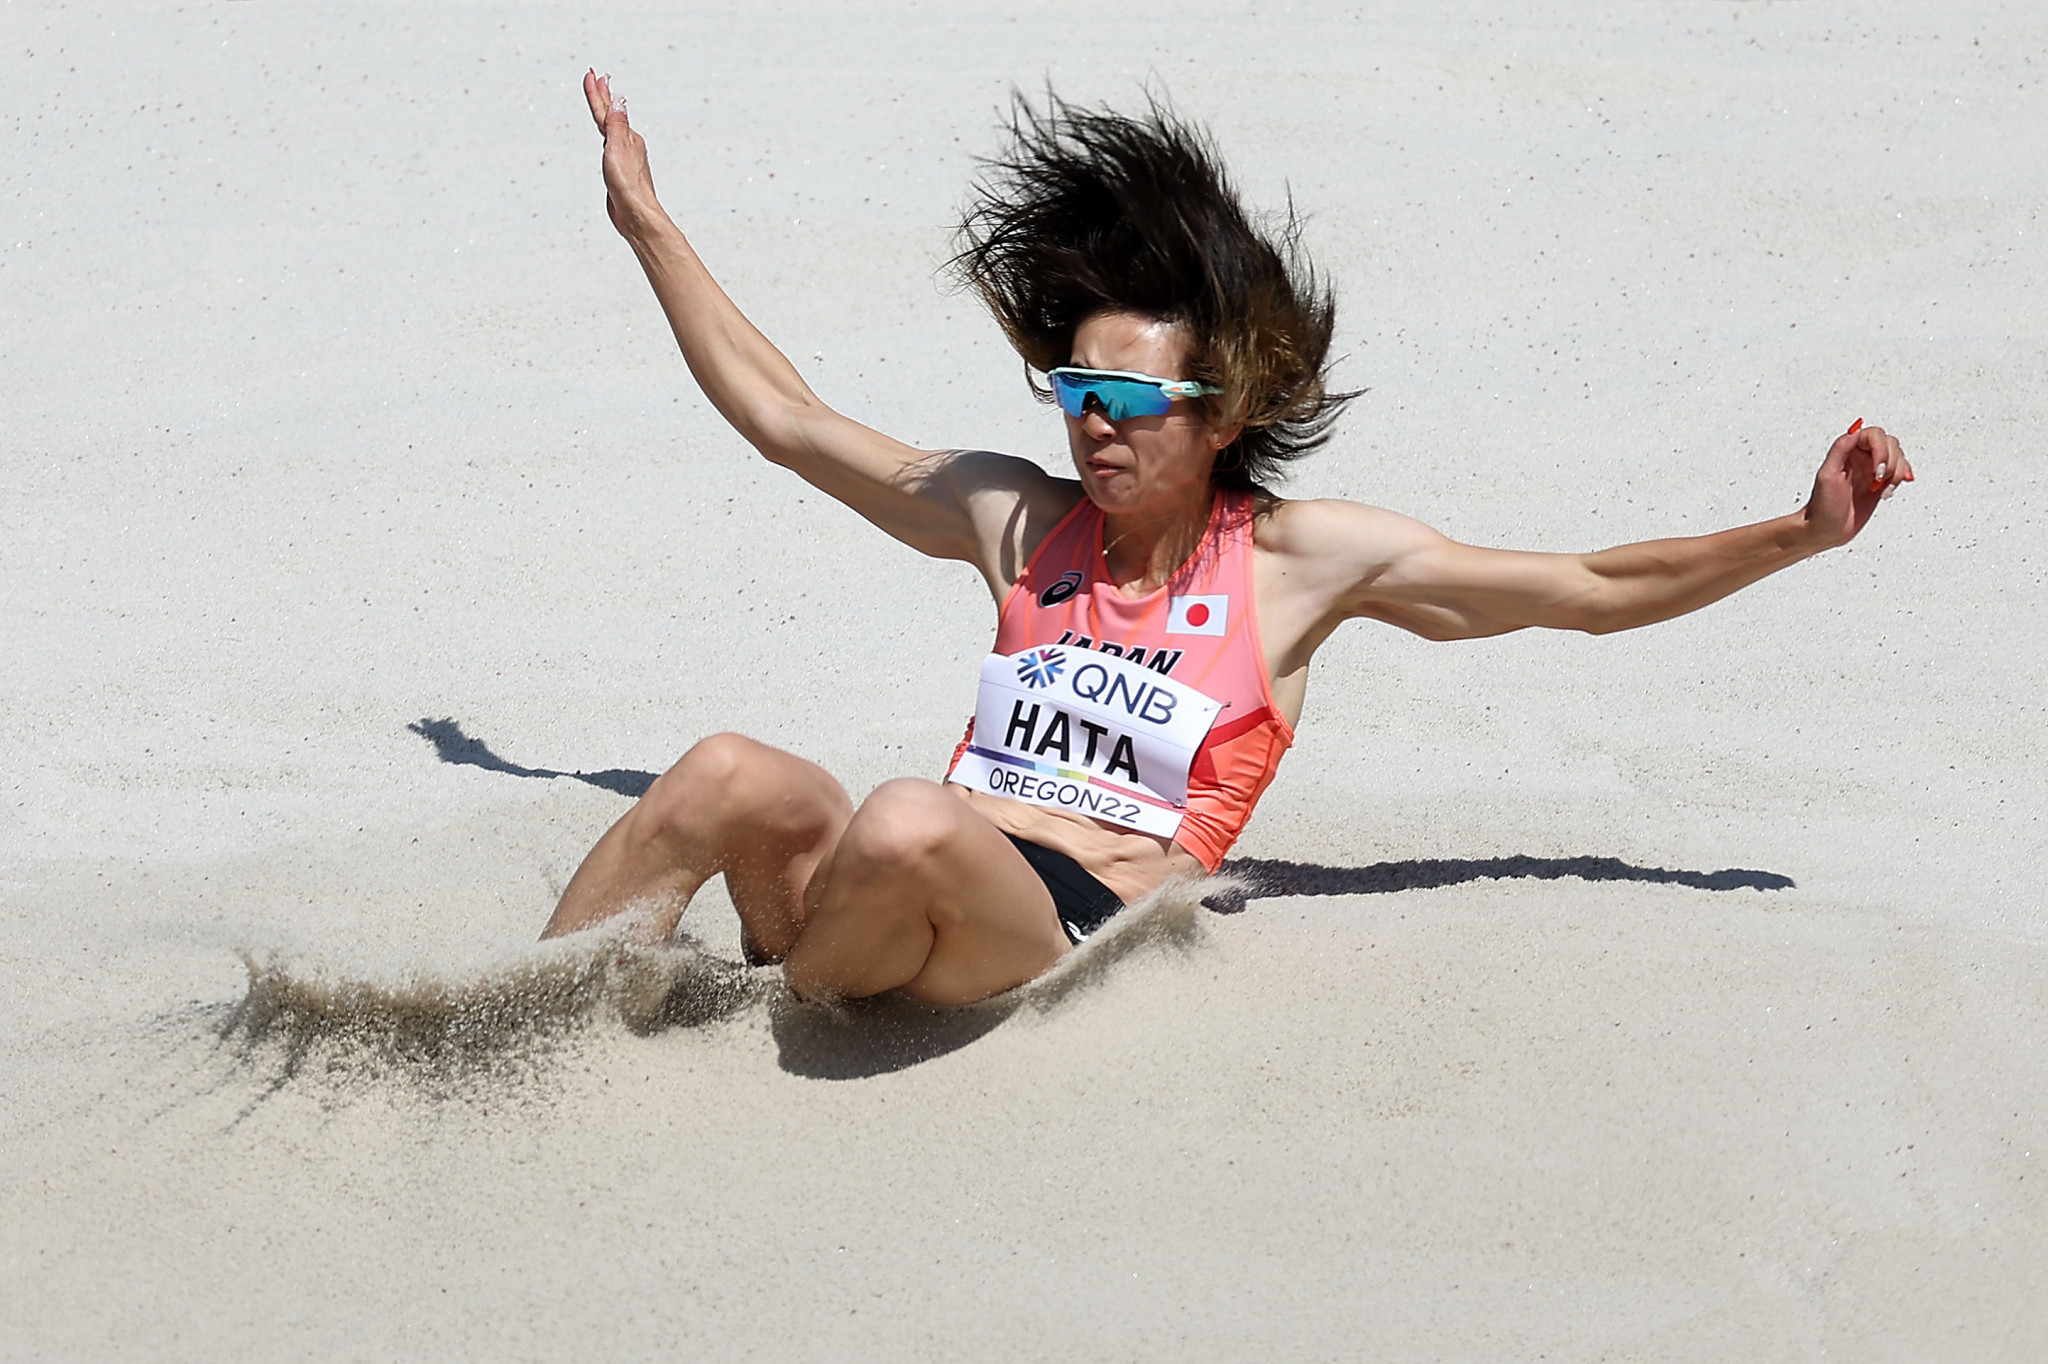 Long jumper Sumire Hata was among Japan's gold medallists on the final day in Astana ©Getty Images